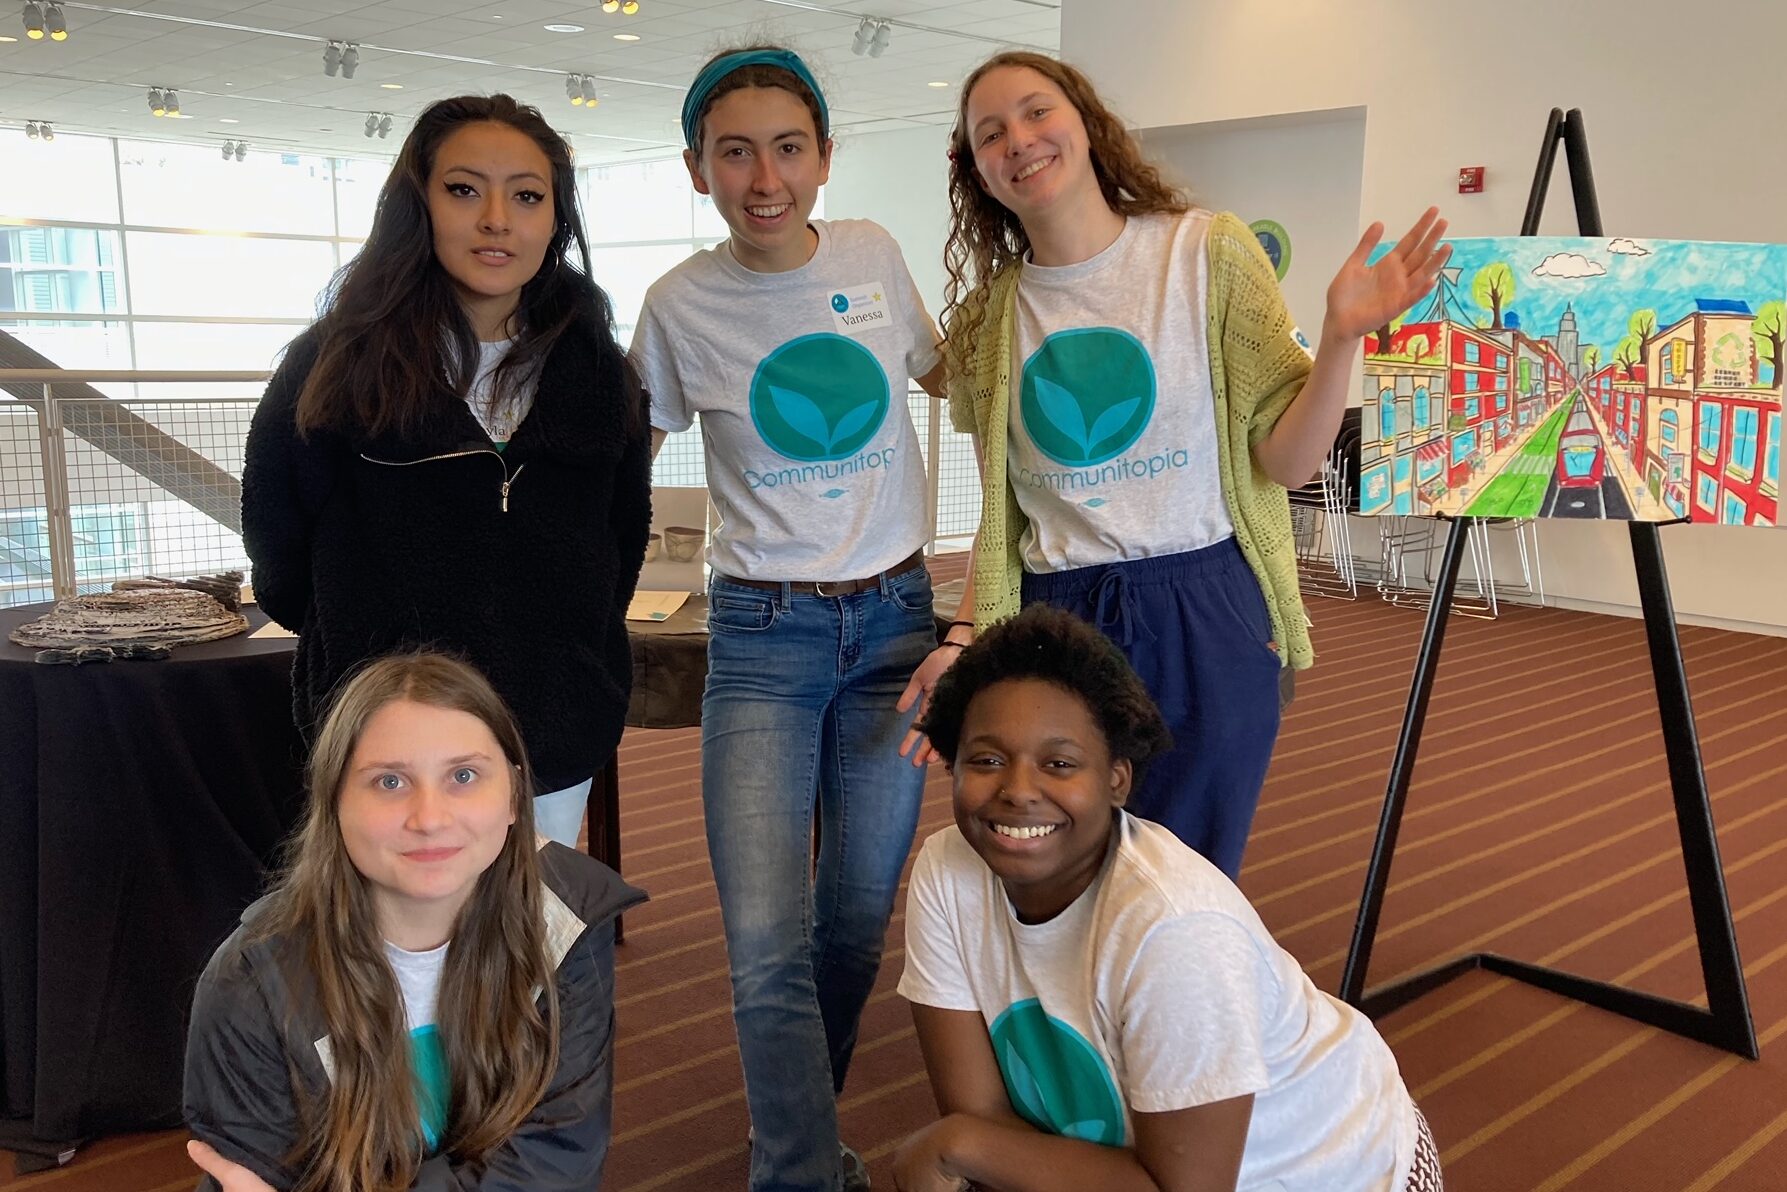 Five smiling young people in climate change tee shirts pose together